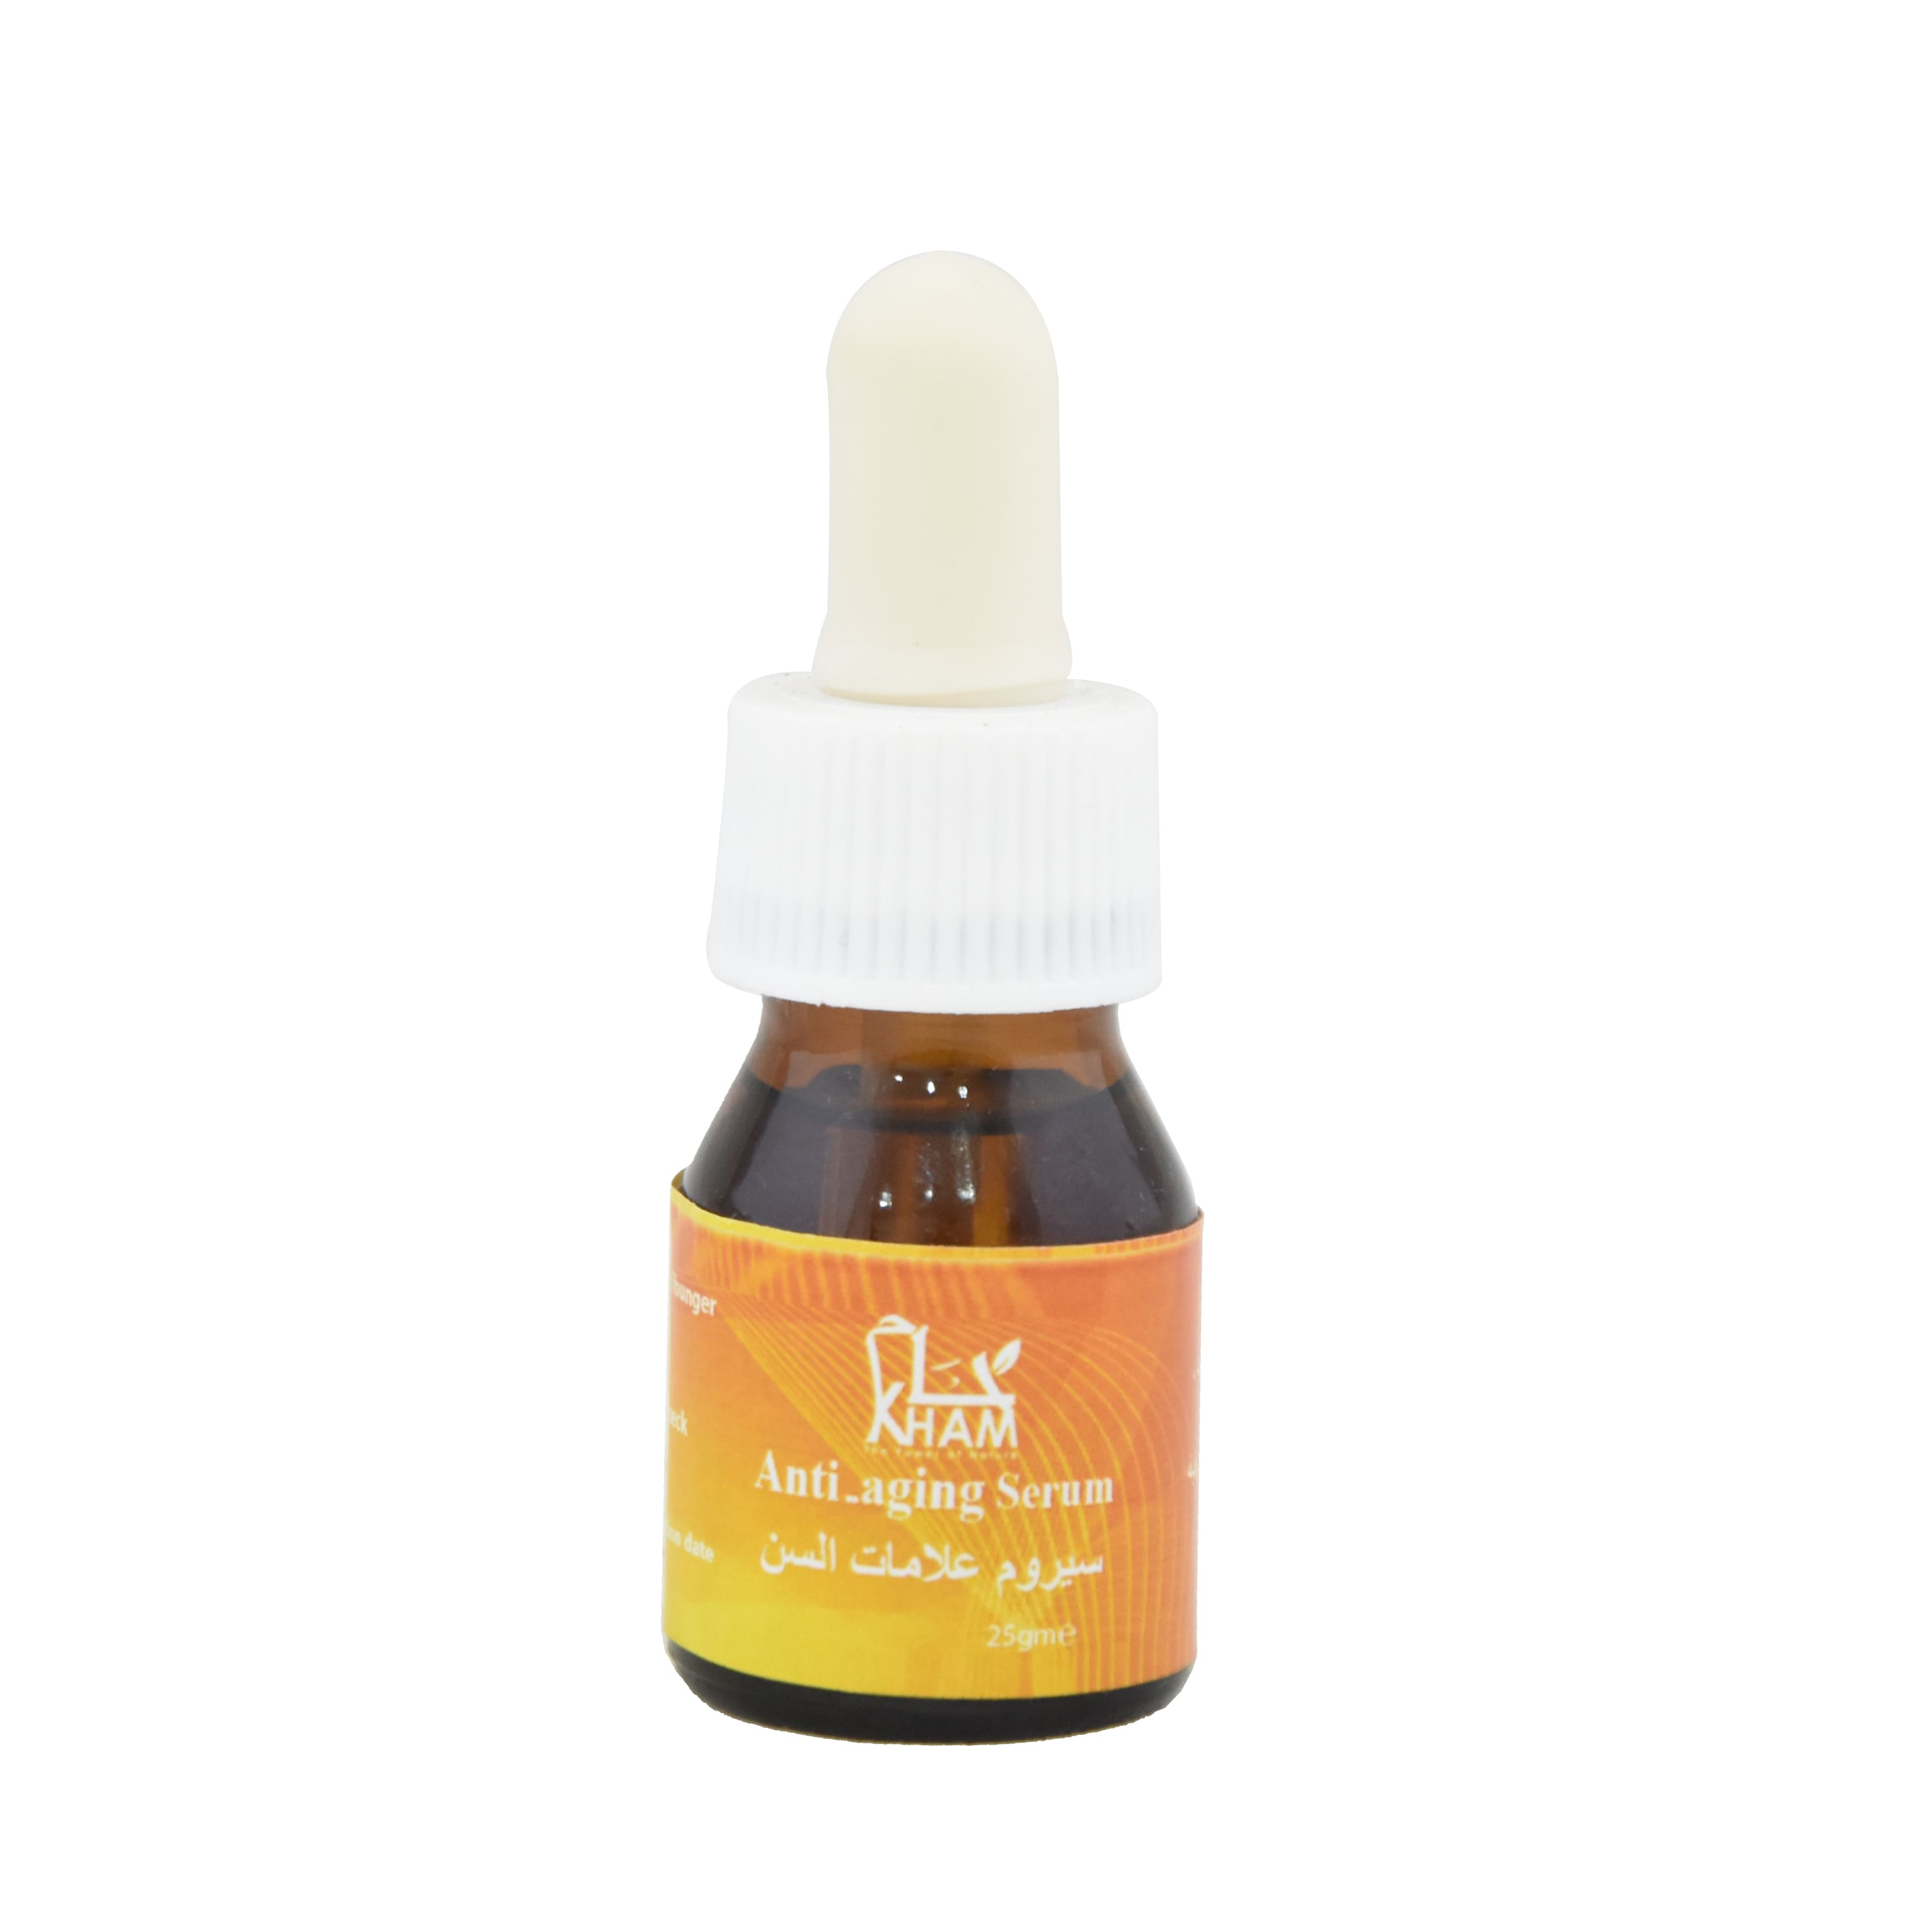 Kham Anti Aging Serum (25 ml) for a younger and Tight Skin